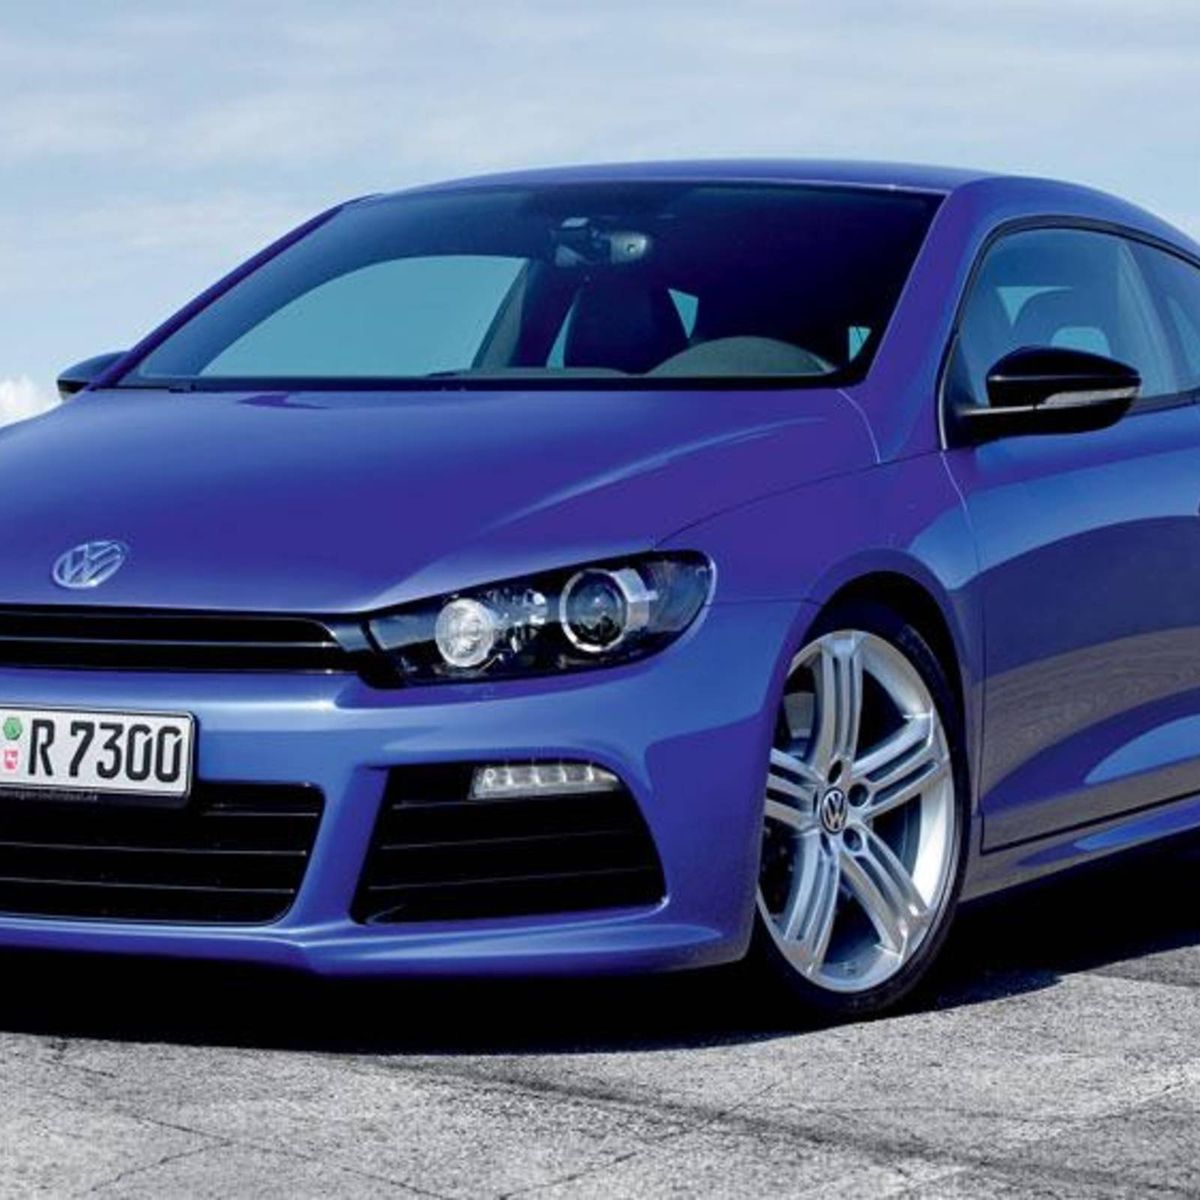 VW Scirocco R: The car that makes you feel dangerous - CNET